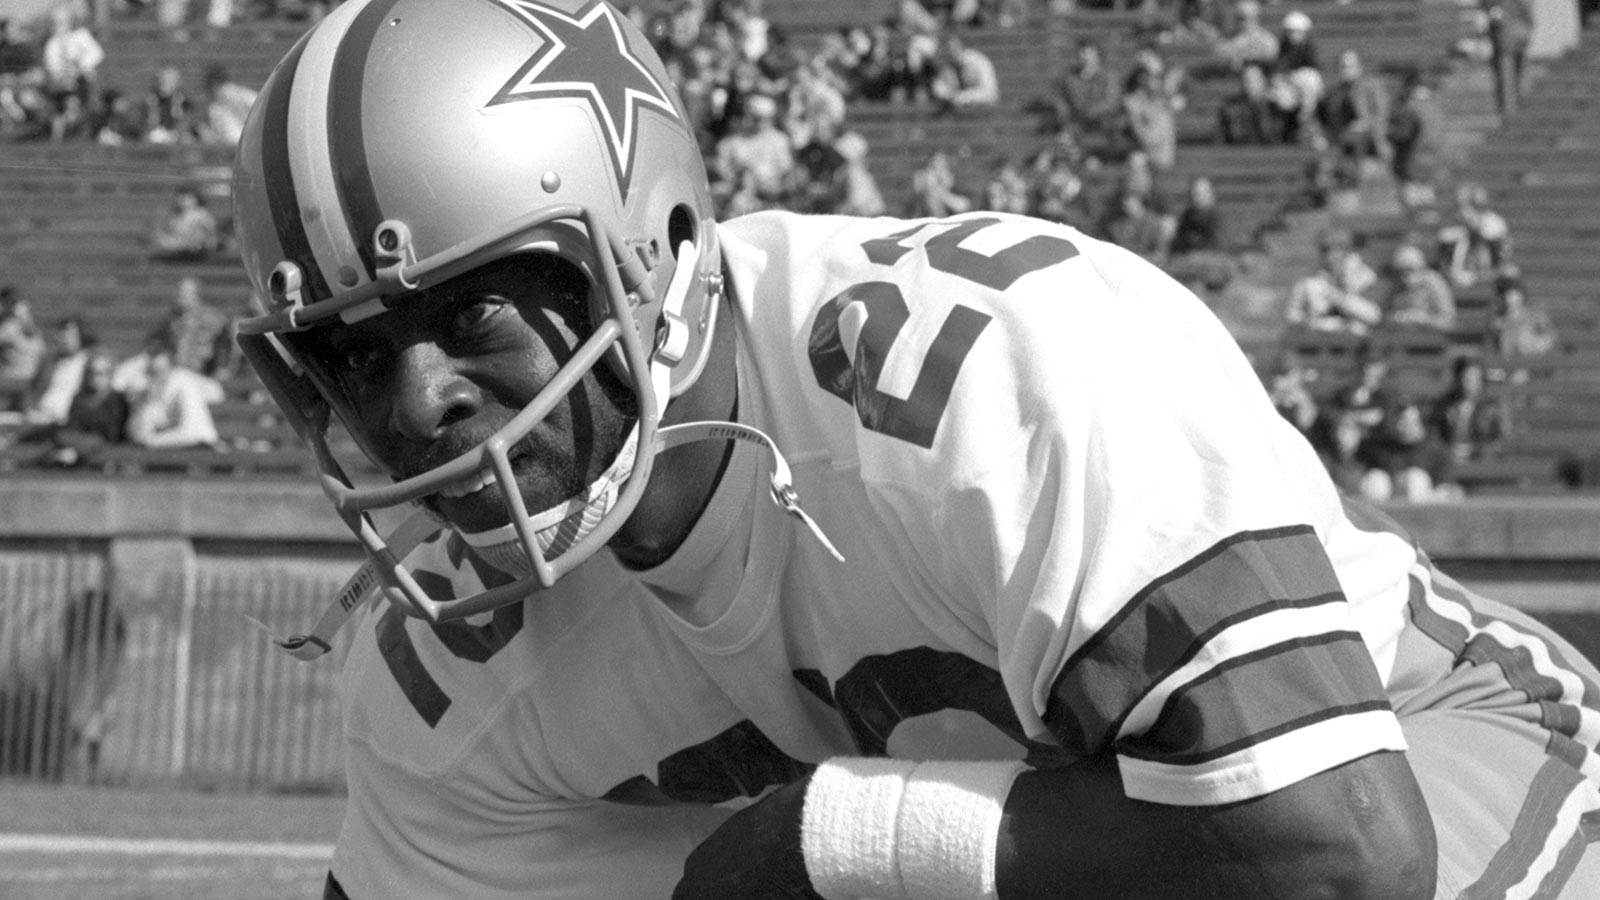 Inside The Star Side Lines - Top 25 Dallas Cowboys of All Time (15-11)